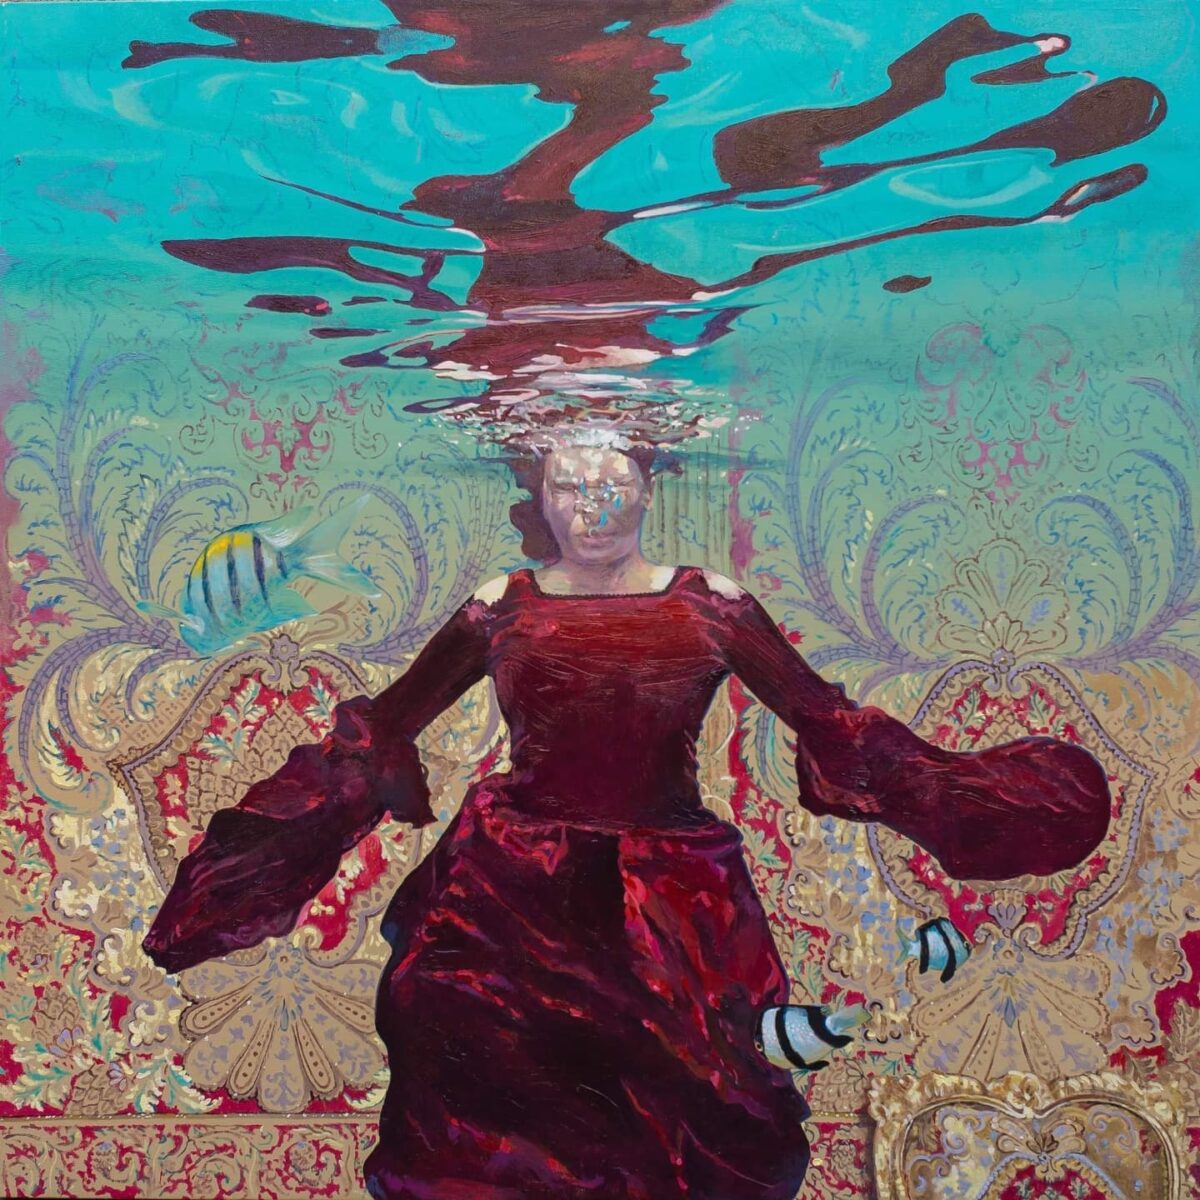 Dream Of Freedom Breathtaking Surrealistic Paintings Of Figures Floating In Flooded Rooms By Ivana Zivic 3